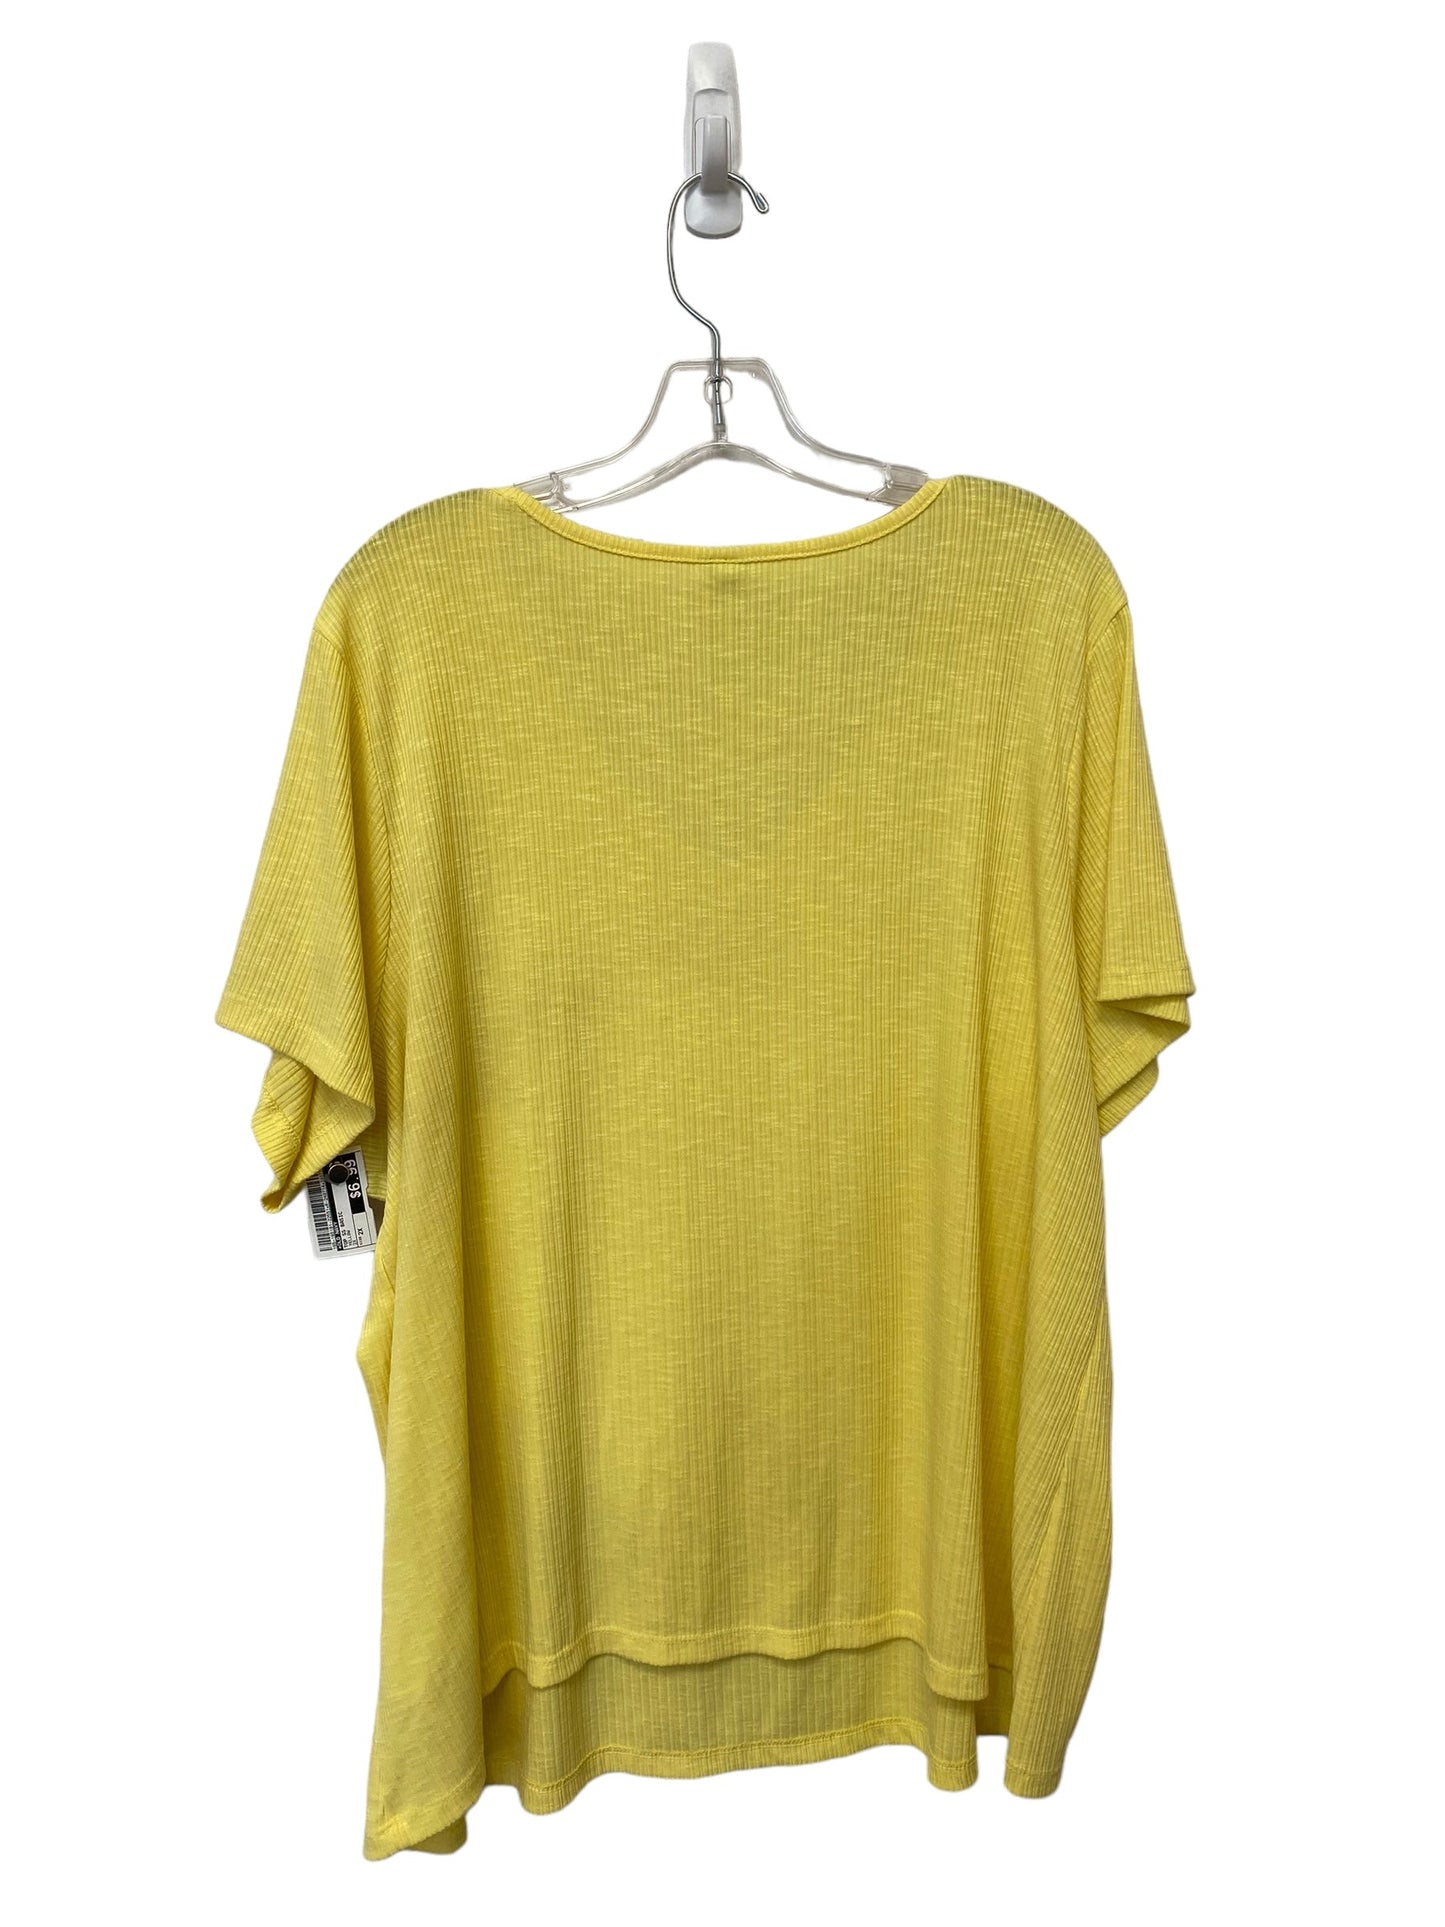 Yellow Top Short Sleeve Basic Old Navy, Size 2x